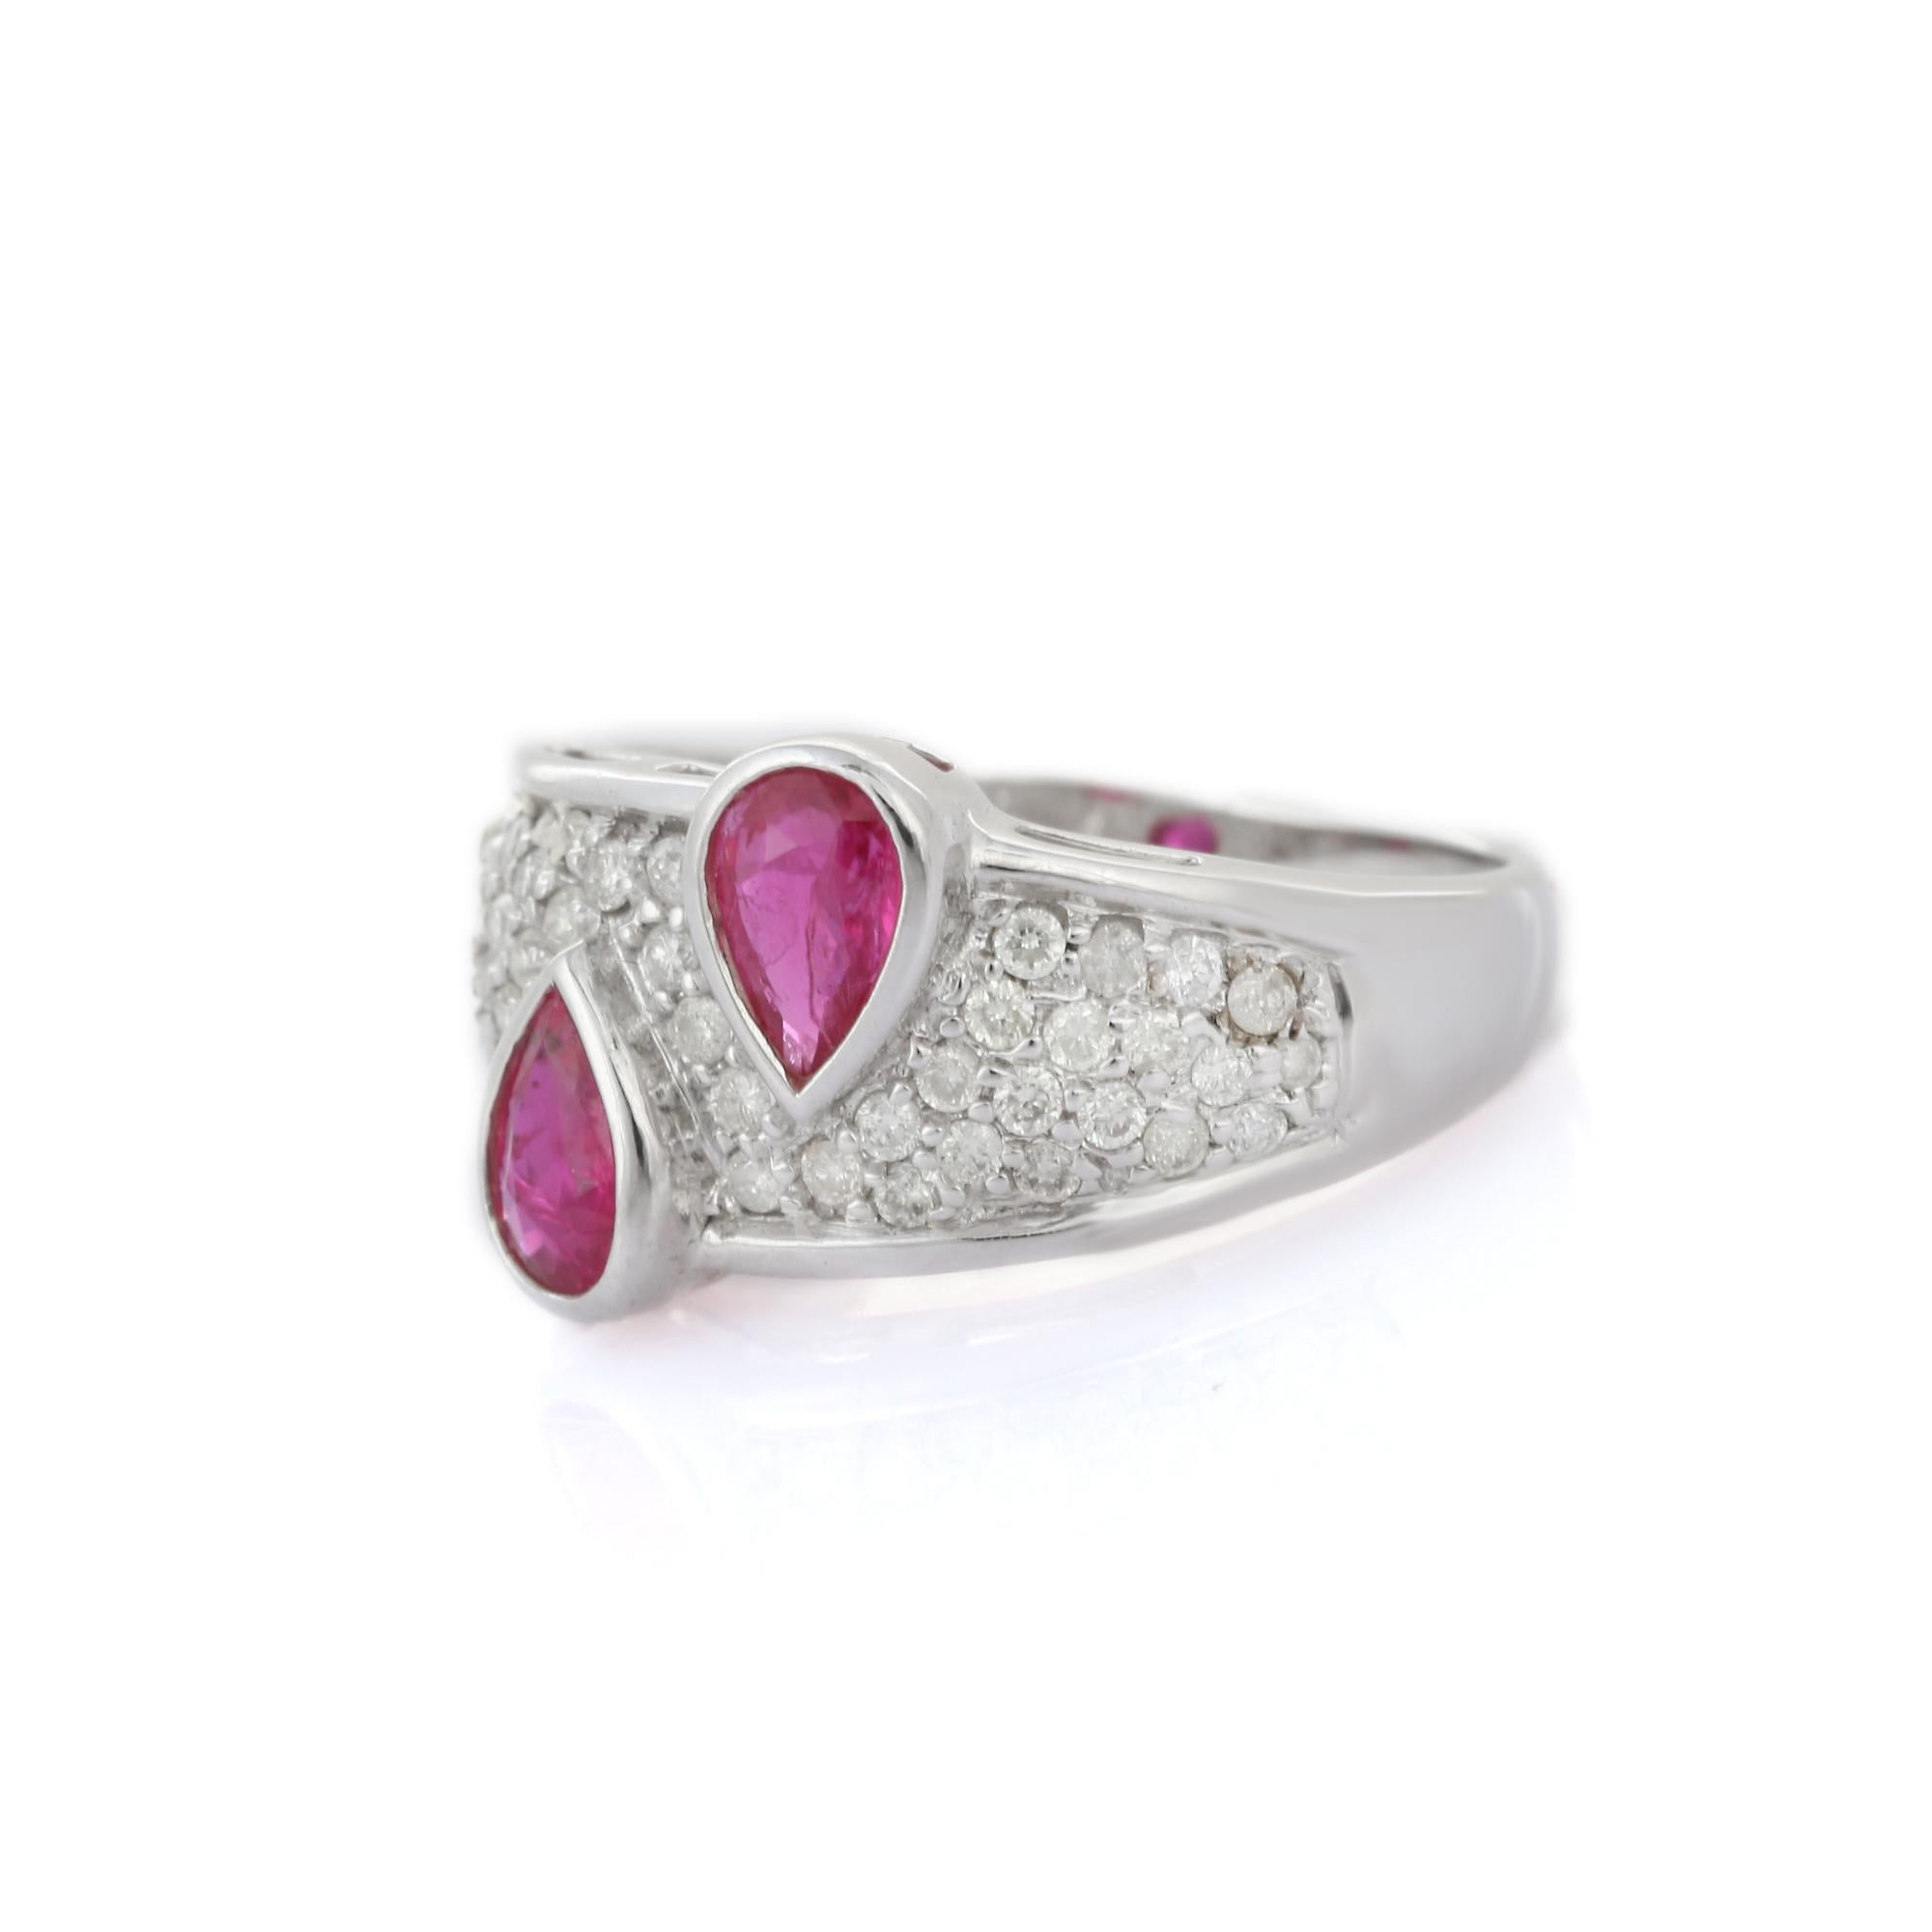 For Sale:  Pear Cut Ruby and Diamond Cocktail Wedding Ring in 18K White Gold  3